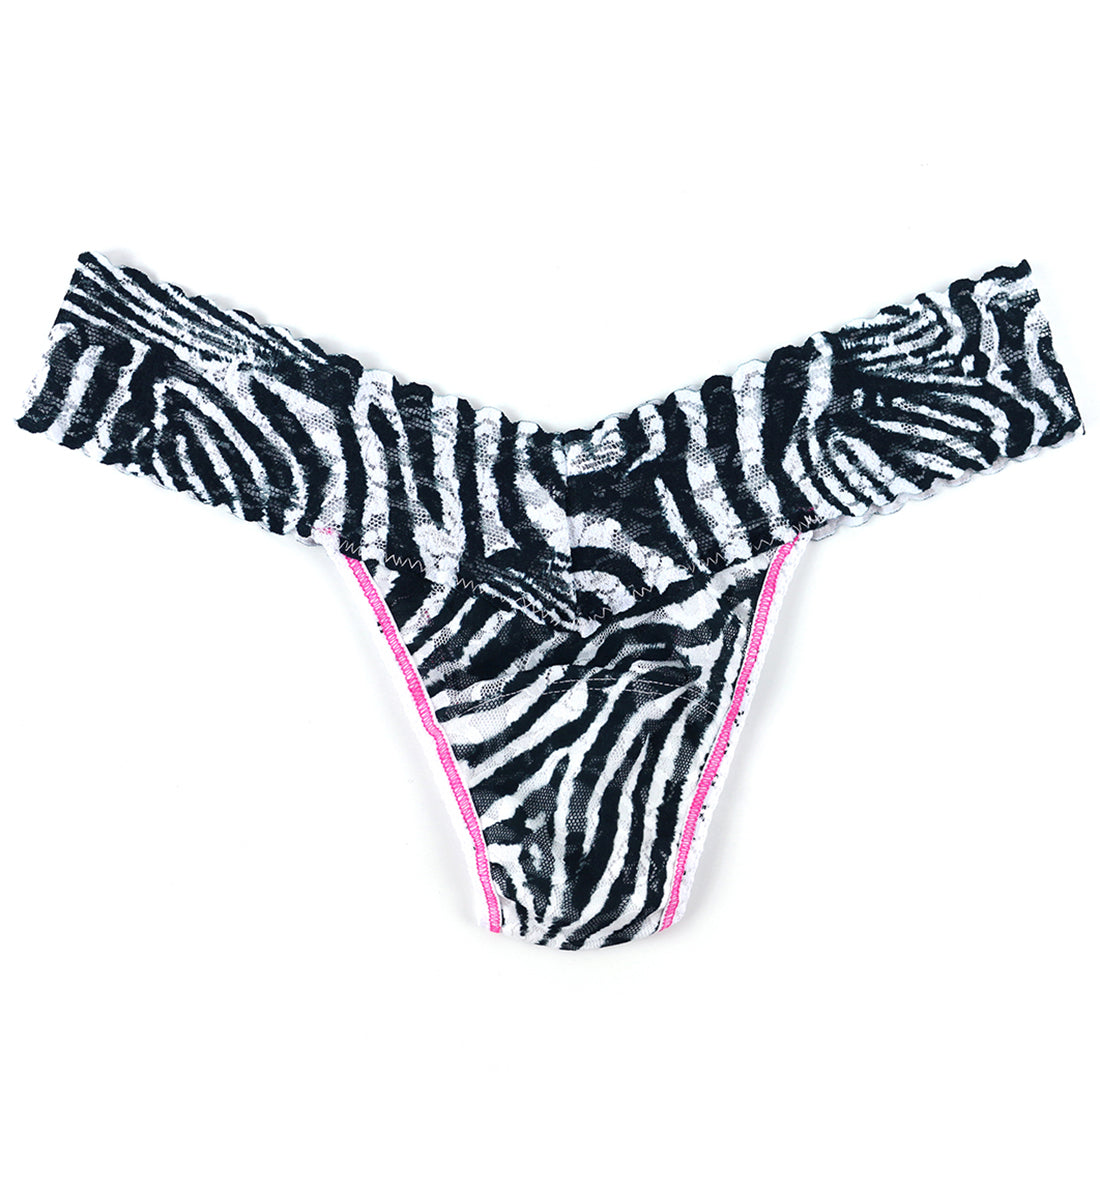 Hanky Panky Decades Aughts Zebra Low Rise Thong - Aughts Zebra,One Size